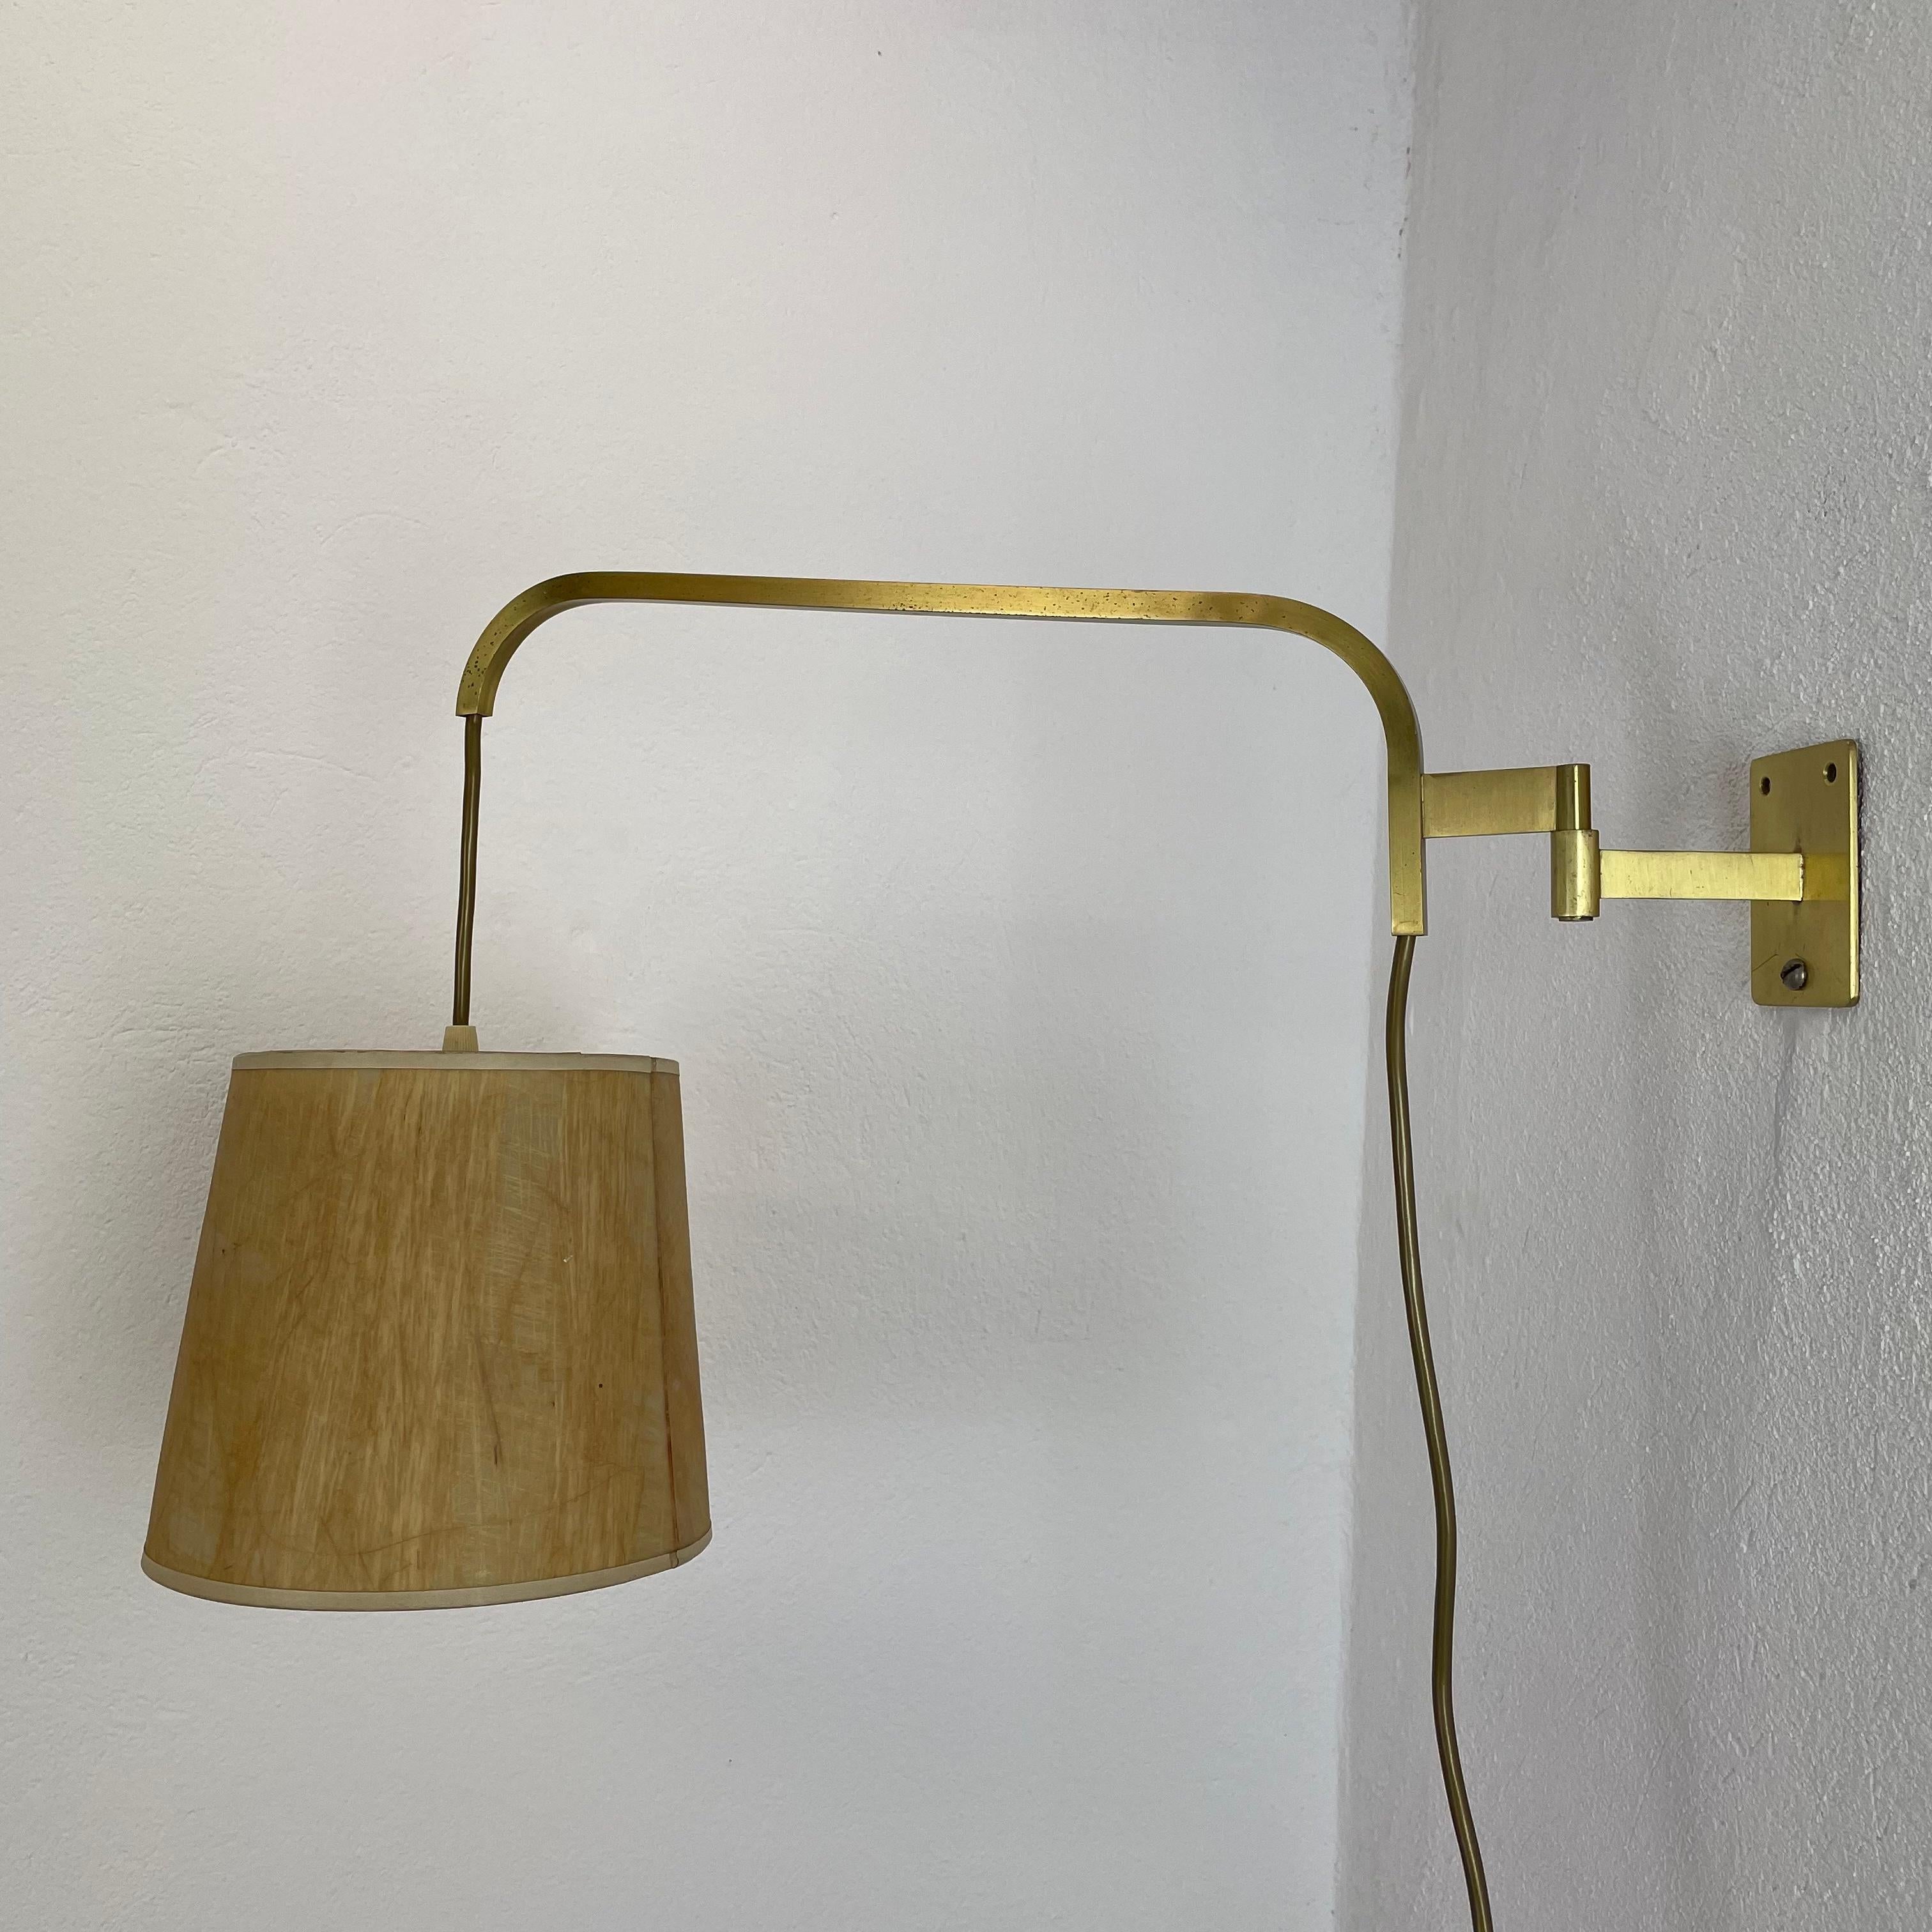 Minimalist Stilnovo Style Adjustable Counter Weight Brass Wall Light Italy 1960s For Sale 7